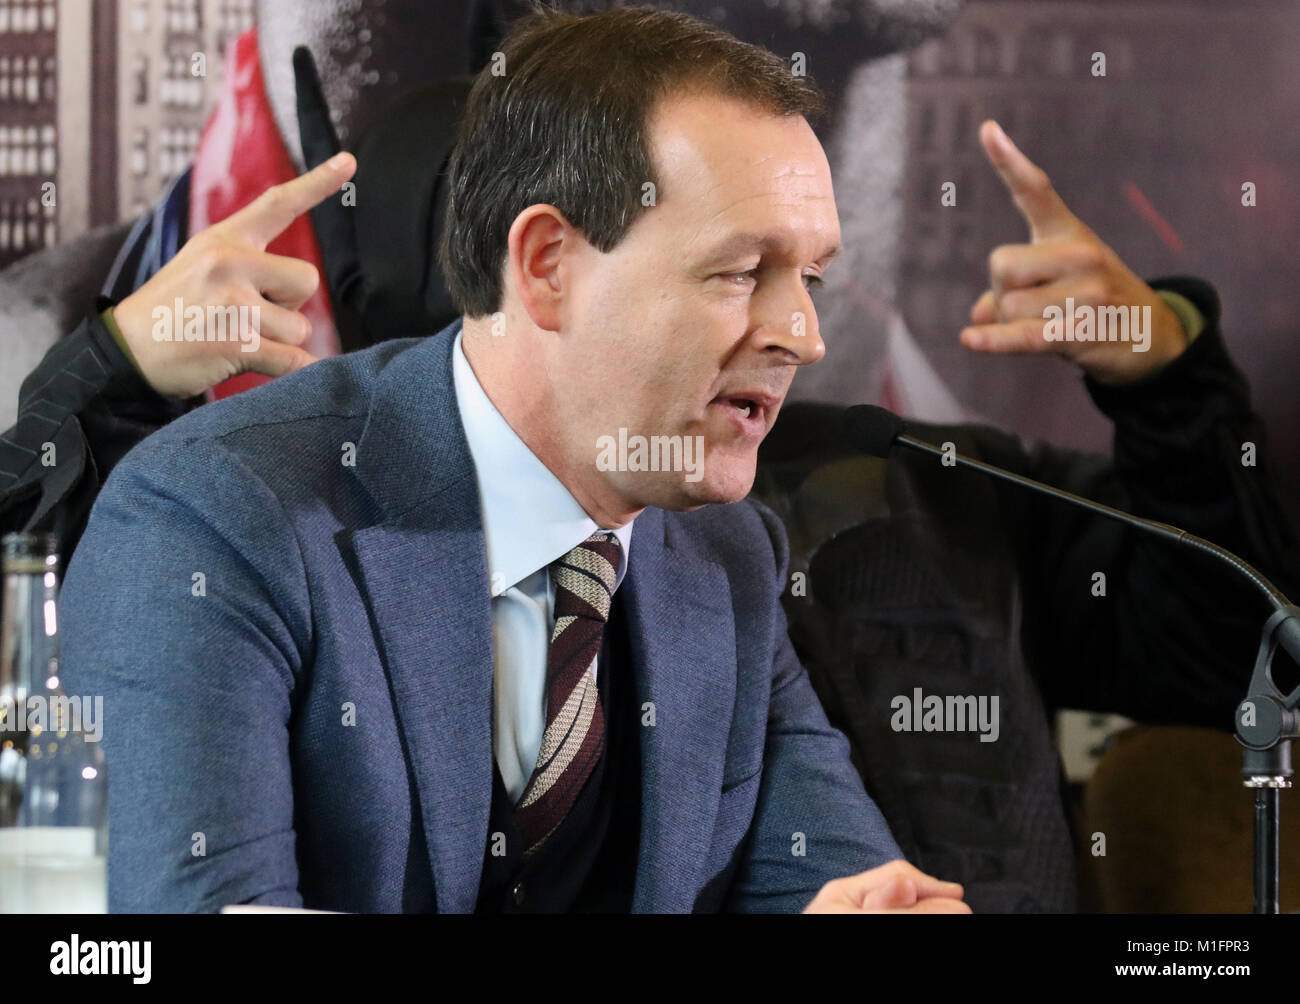 Hilton Hotel, Liverpool. 30th January 2018. Sky’s Head of Boxing Adam Smith. Amir Khan vs. Phil Lo Greco Press Conference. Boxers promoted by Eddie Hearn gather at the pre fight press conference between Amir Khan and Phil Lo Greco.  After Lo Greco makes insults referring to Khan's personal life a melee and heated exchange ensues.  Khan makes his ring return after a two year absence as he announces his upcoming fight on 21 April at the Echo Arena, Liverpool.  Credit: MediaWorldImages/Alamy Live News. Stock Photo